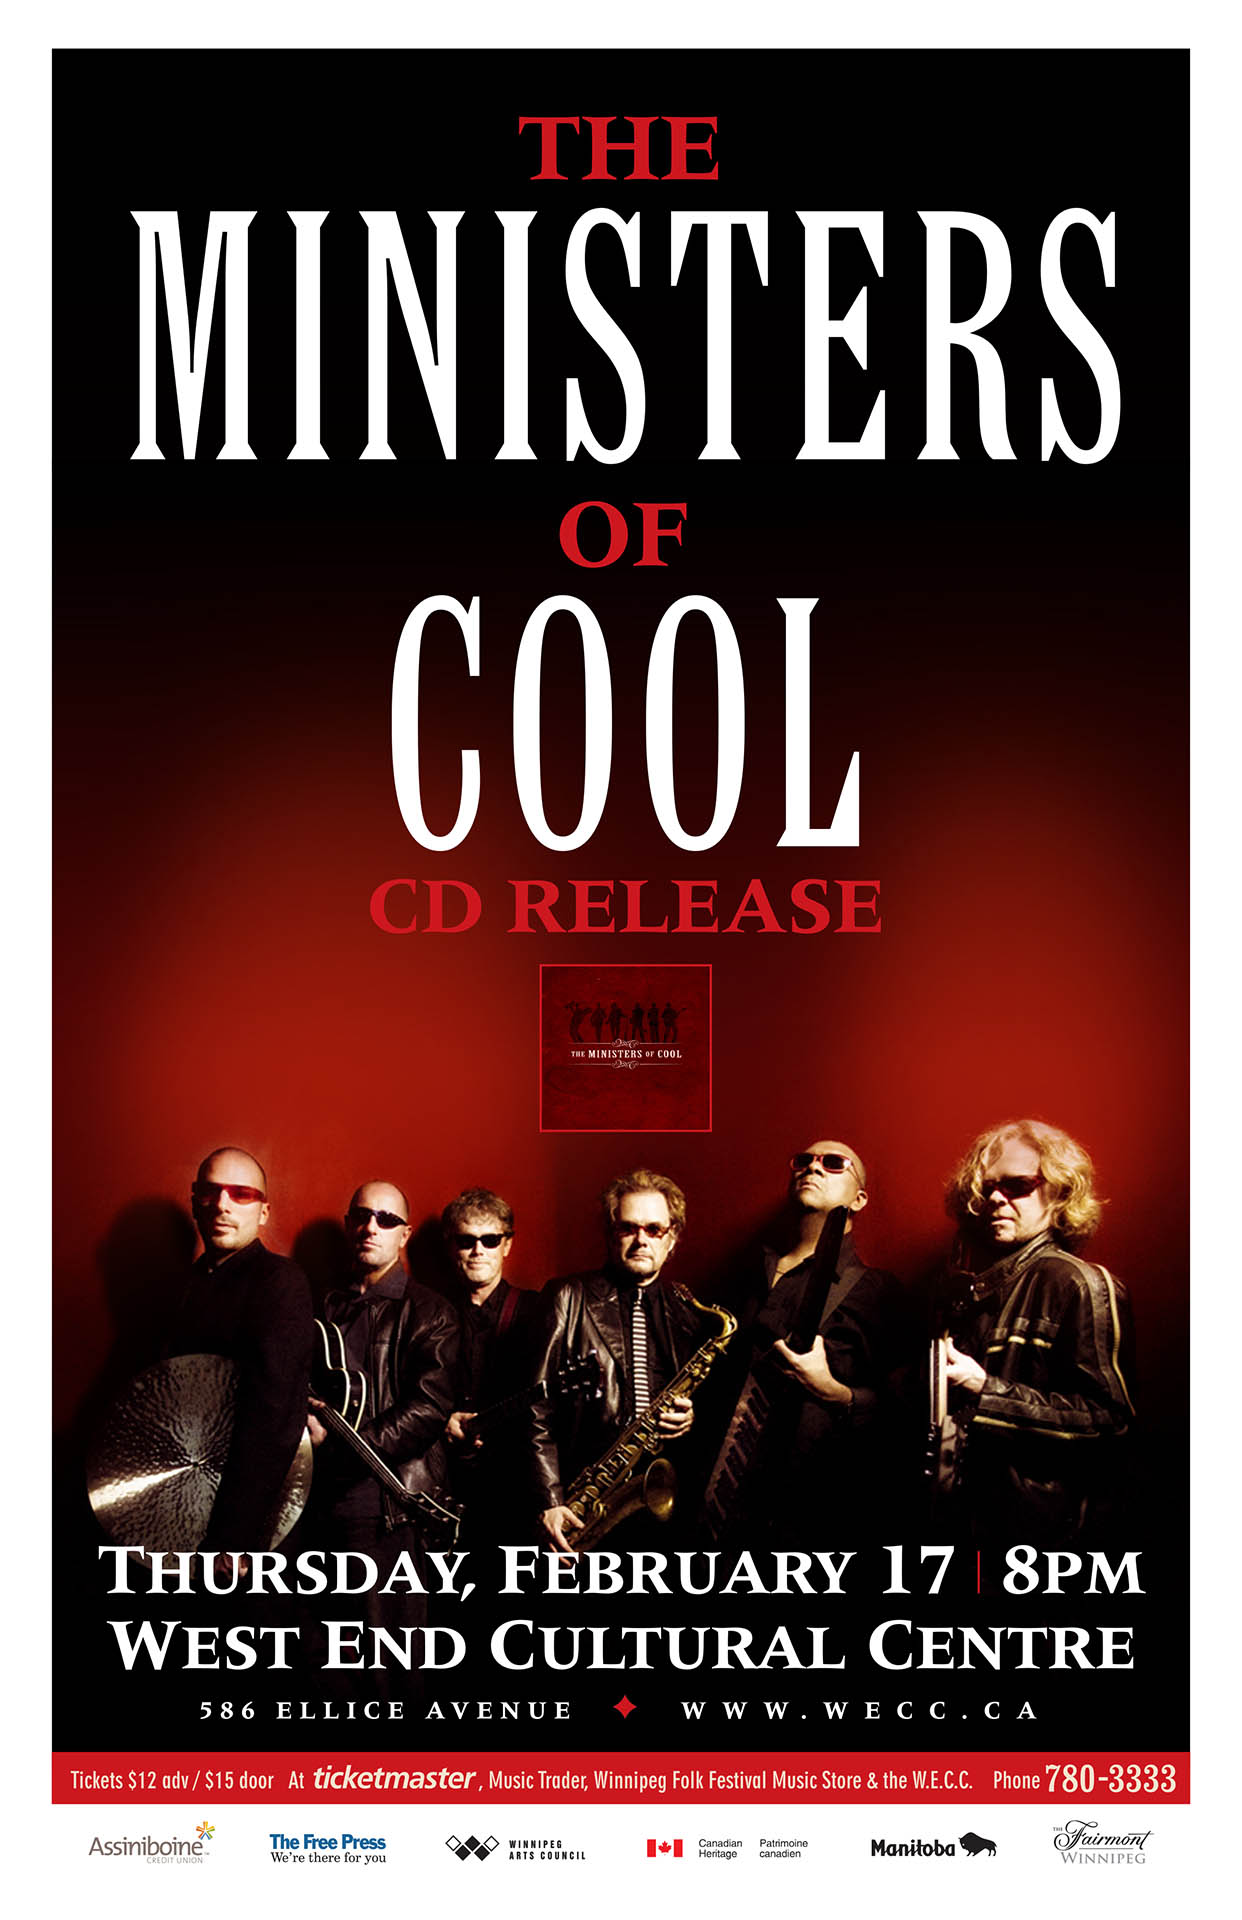 MINISTERS OF COOL – 2011